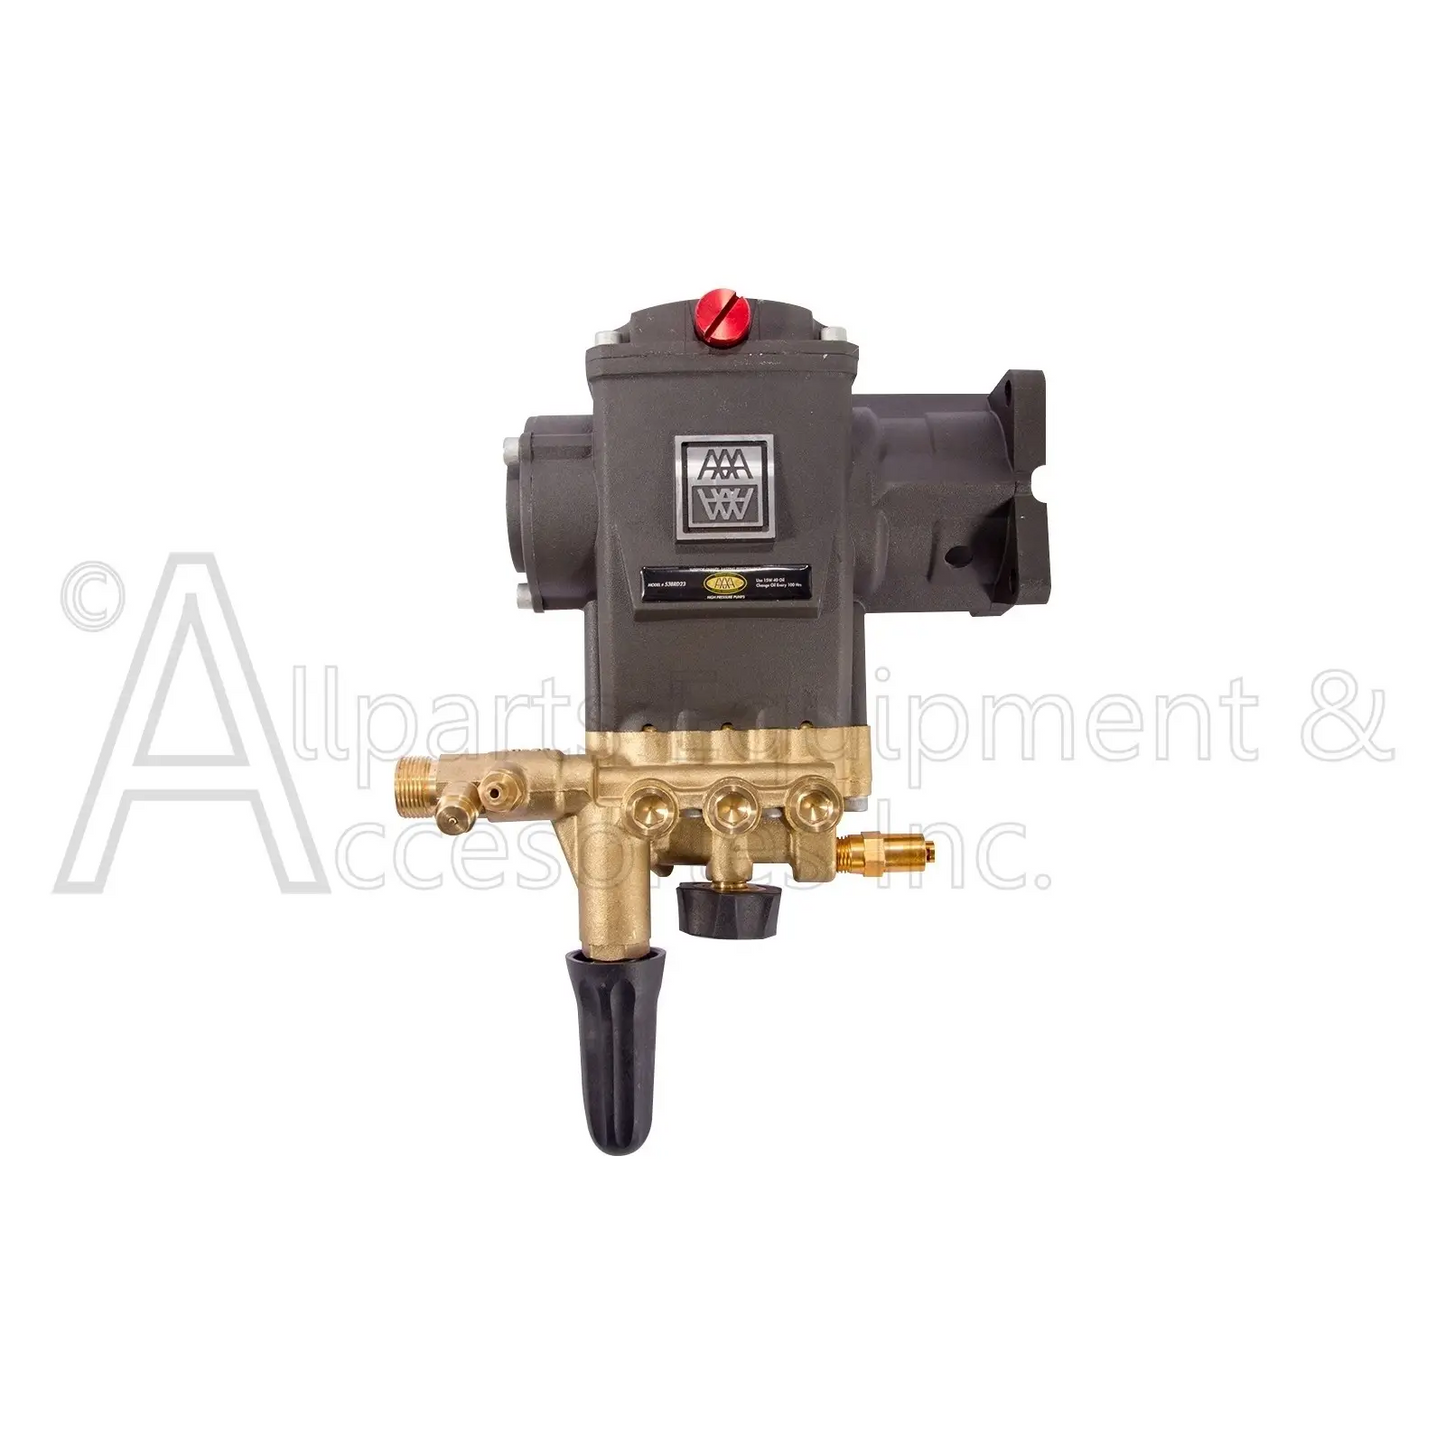 530002 Triplex Plunger Pump By Aaa 2.8 Gpm 3200 Psi